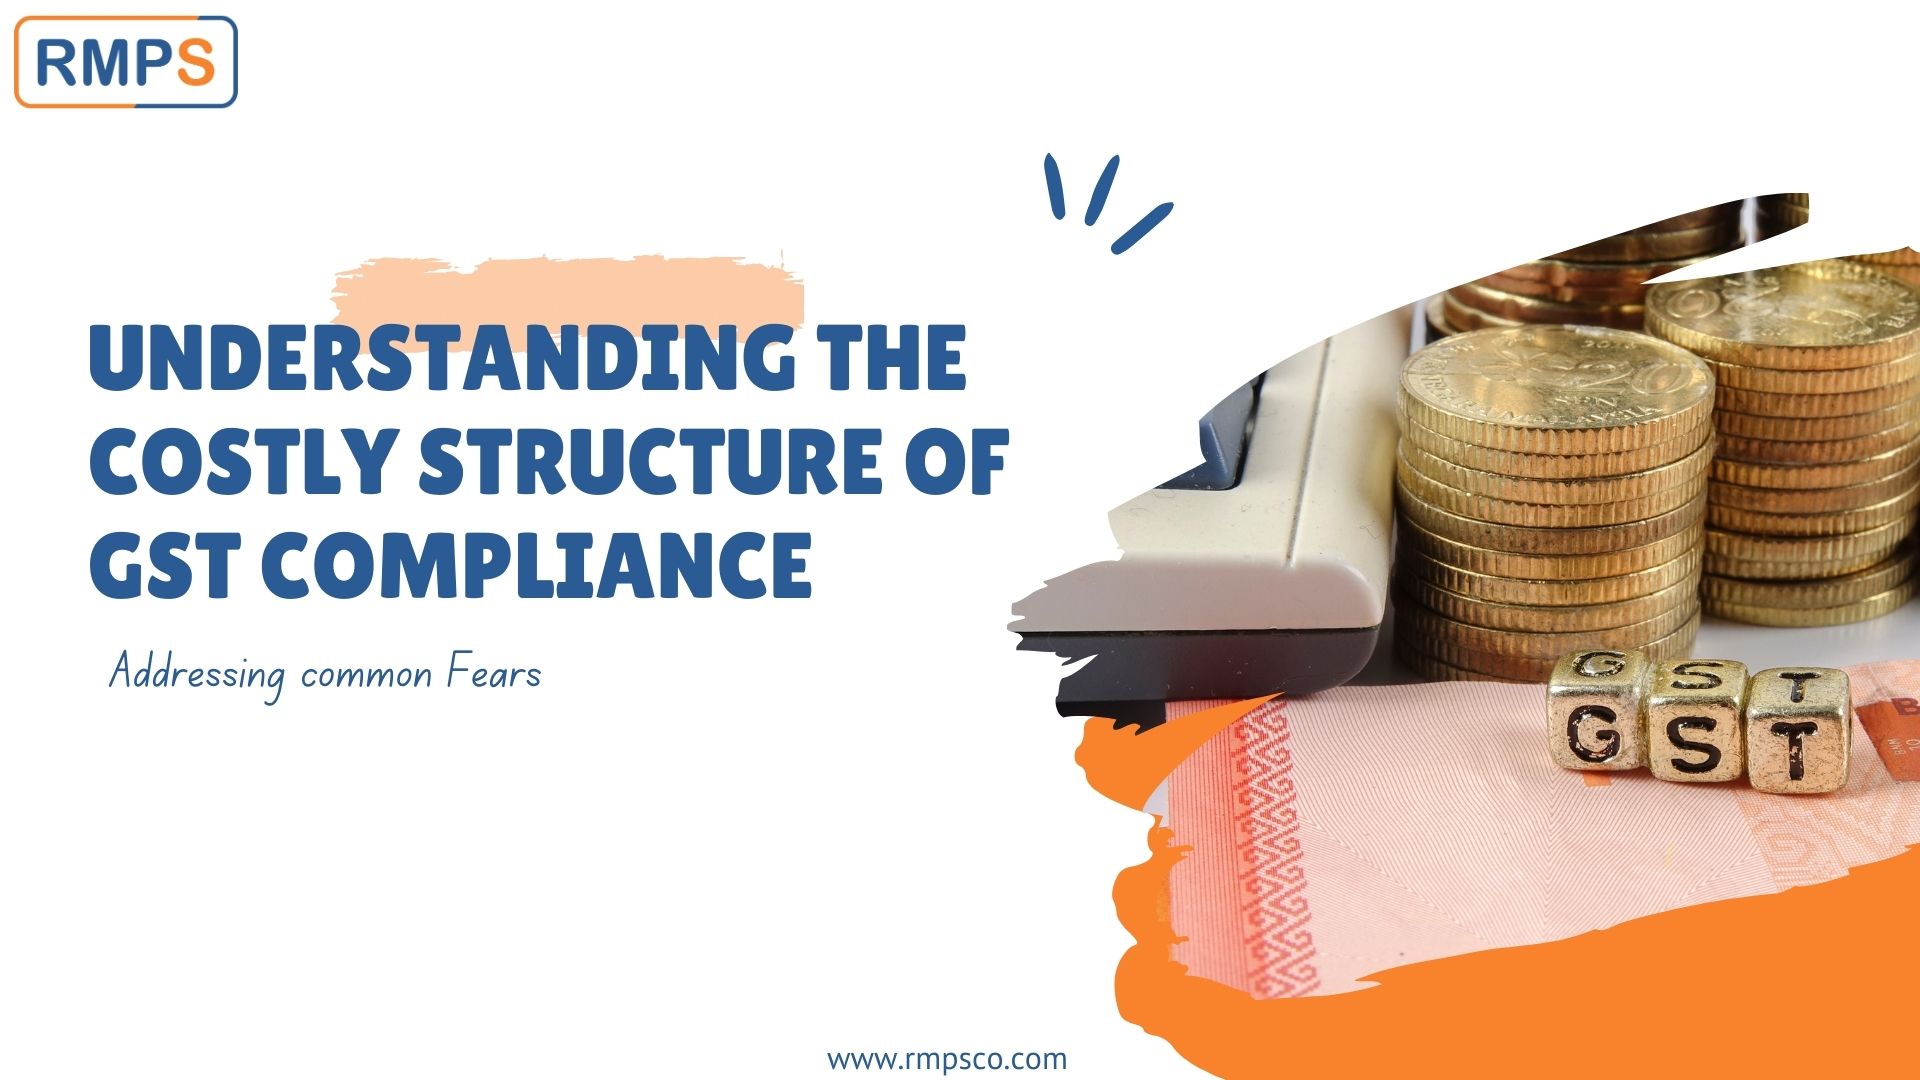 C:\Users\BAPS\RMPS & Co\RMPS Contents - RMPS GST\Pooja\Understanding the Costly Structure of GST Compliance Addressing Common Fears